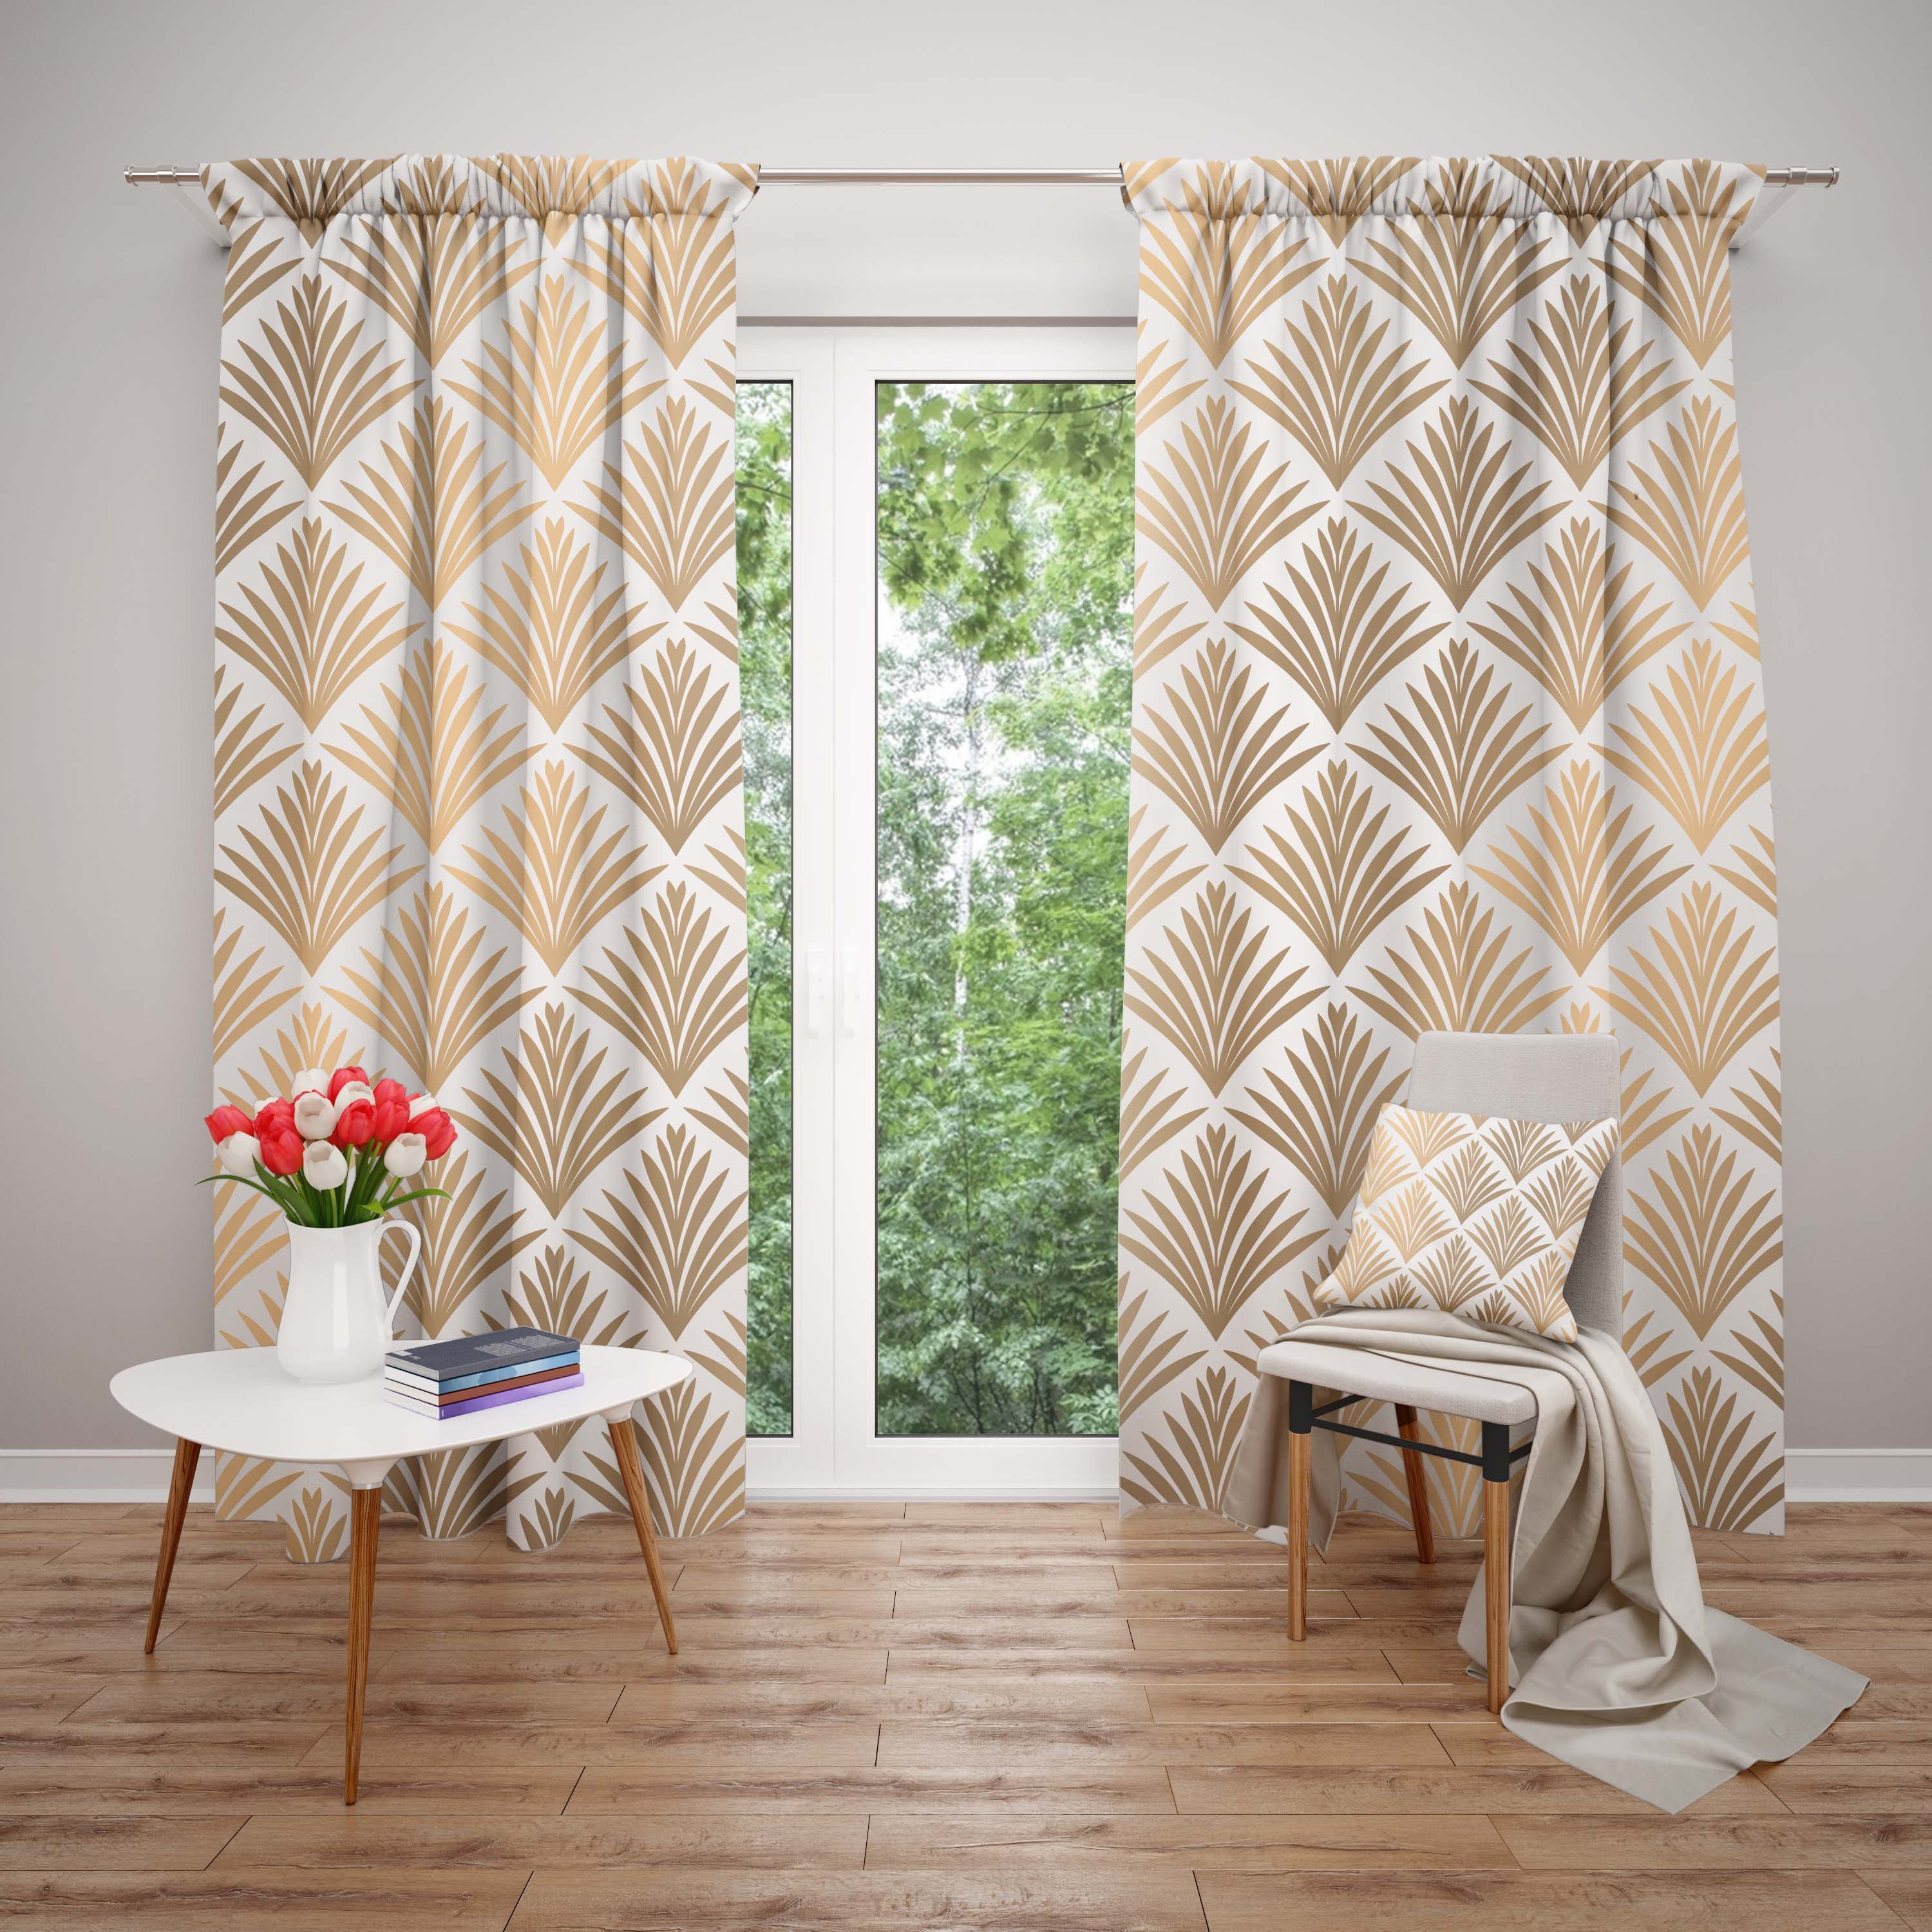 kexinda Short Window Sheer Curtains Valance Living Room Feather Embroidered Voile Rod Pocket Curtain Drapes for Dining Room 